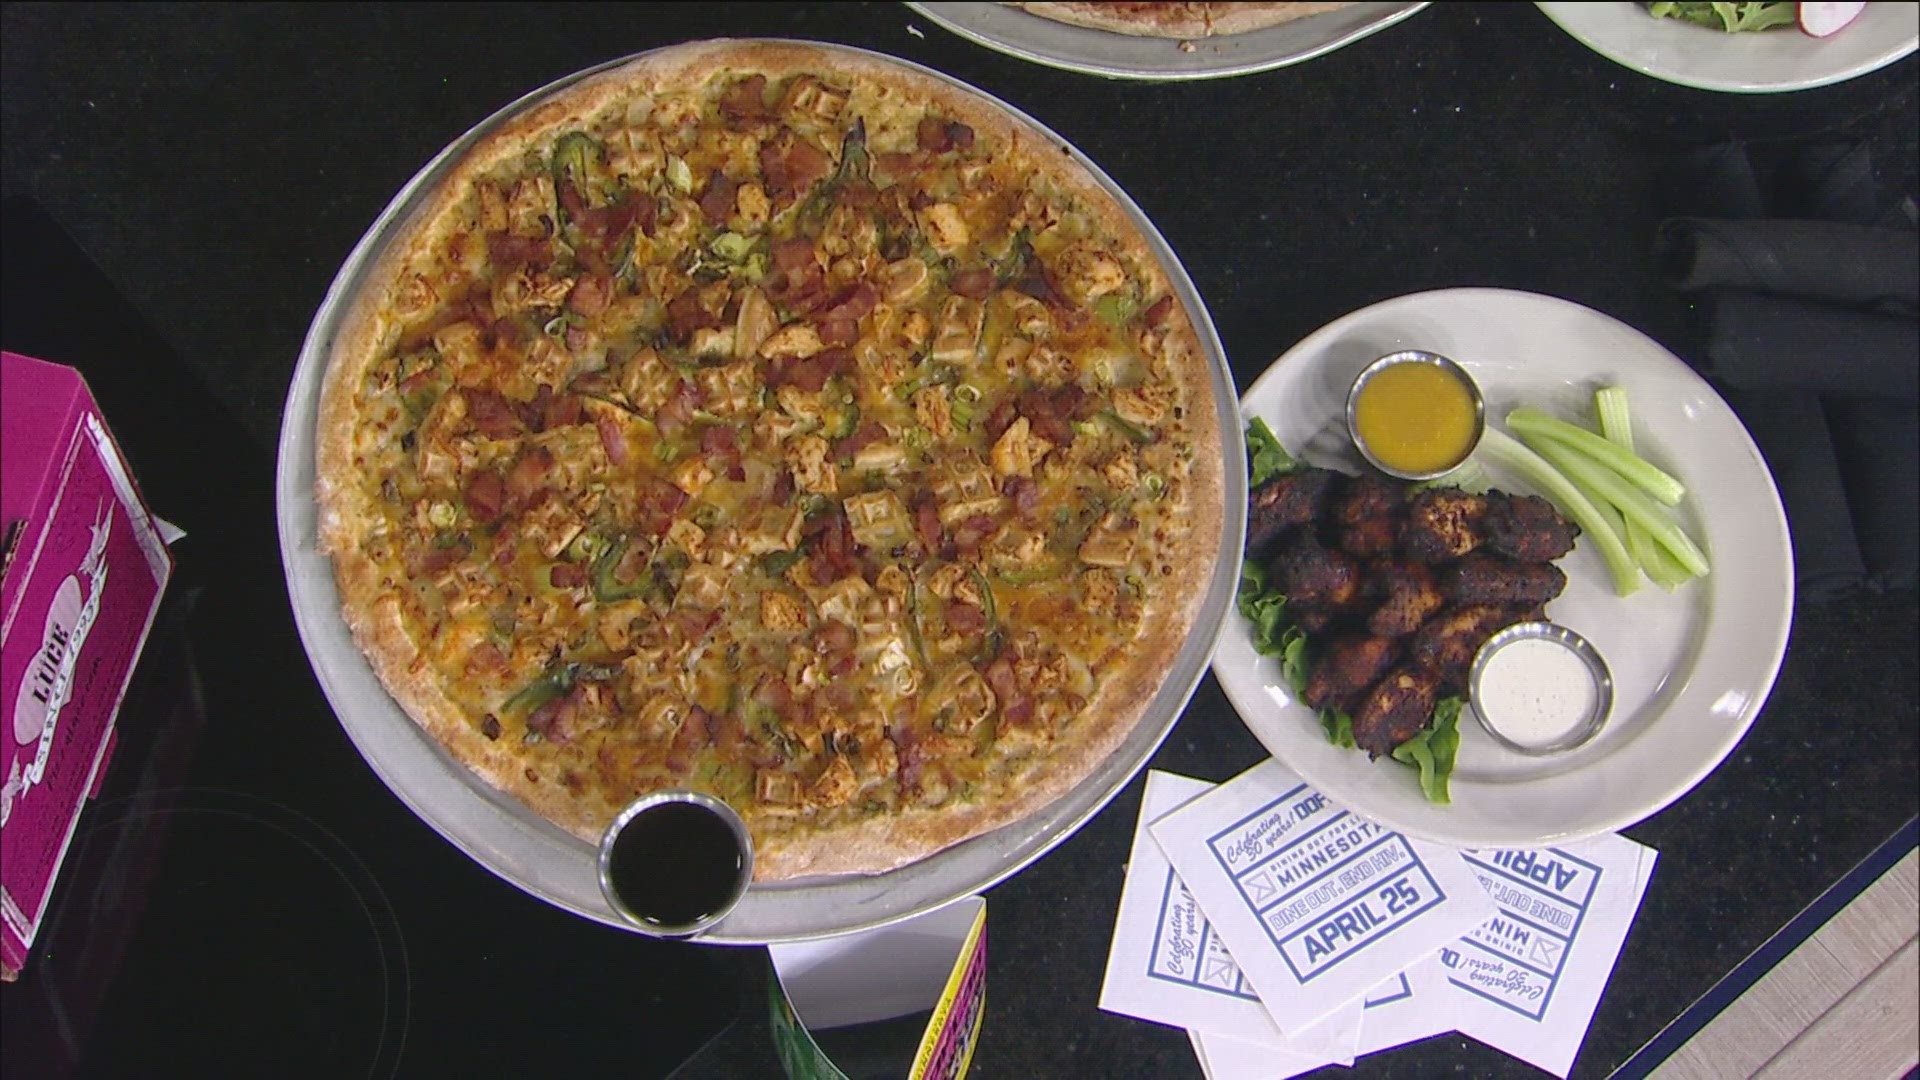 Pizza Luce joined KARE 11 News at Noon to invite pizza lovers into any of its restaurants on April 25, as 35% of proceeds will go toward Dining Out For Life.